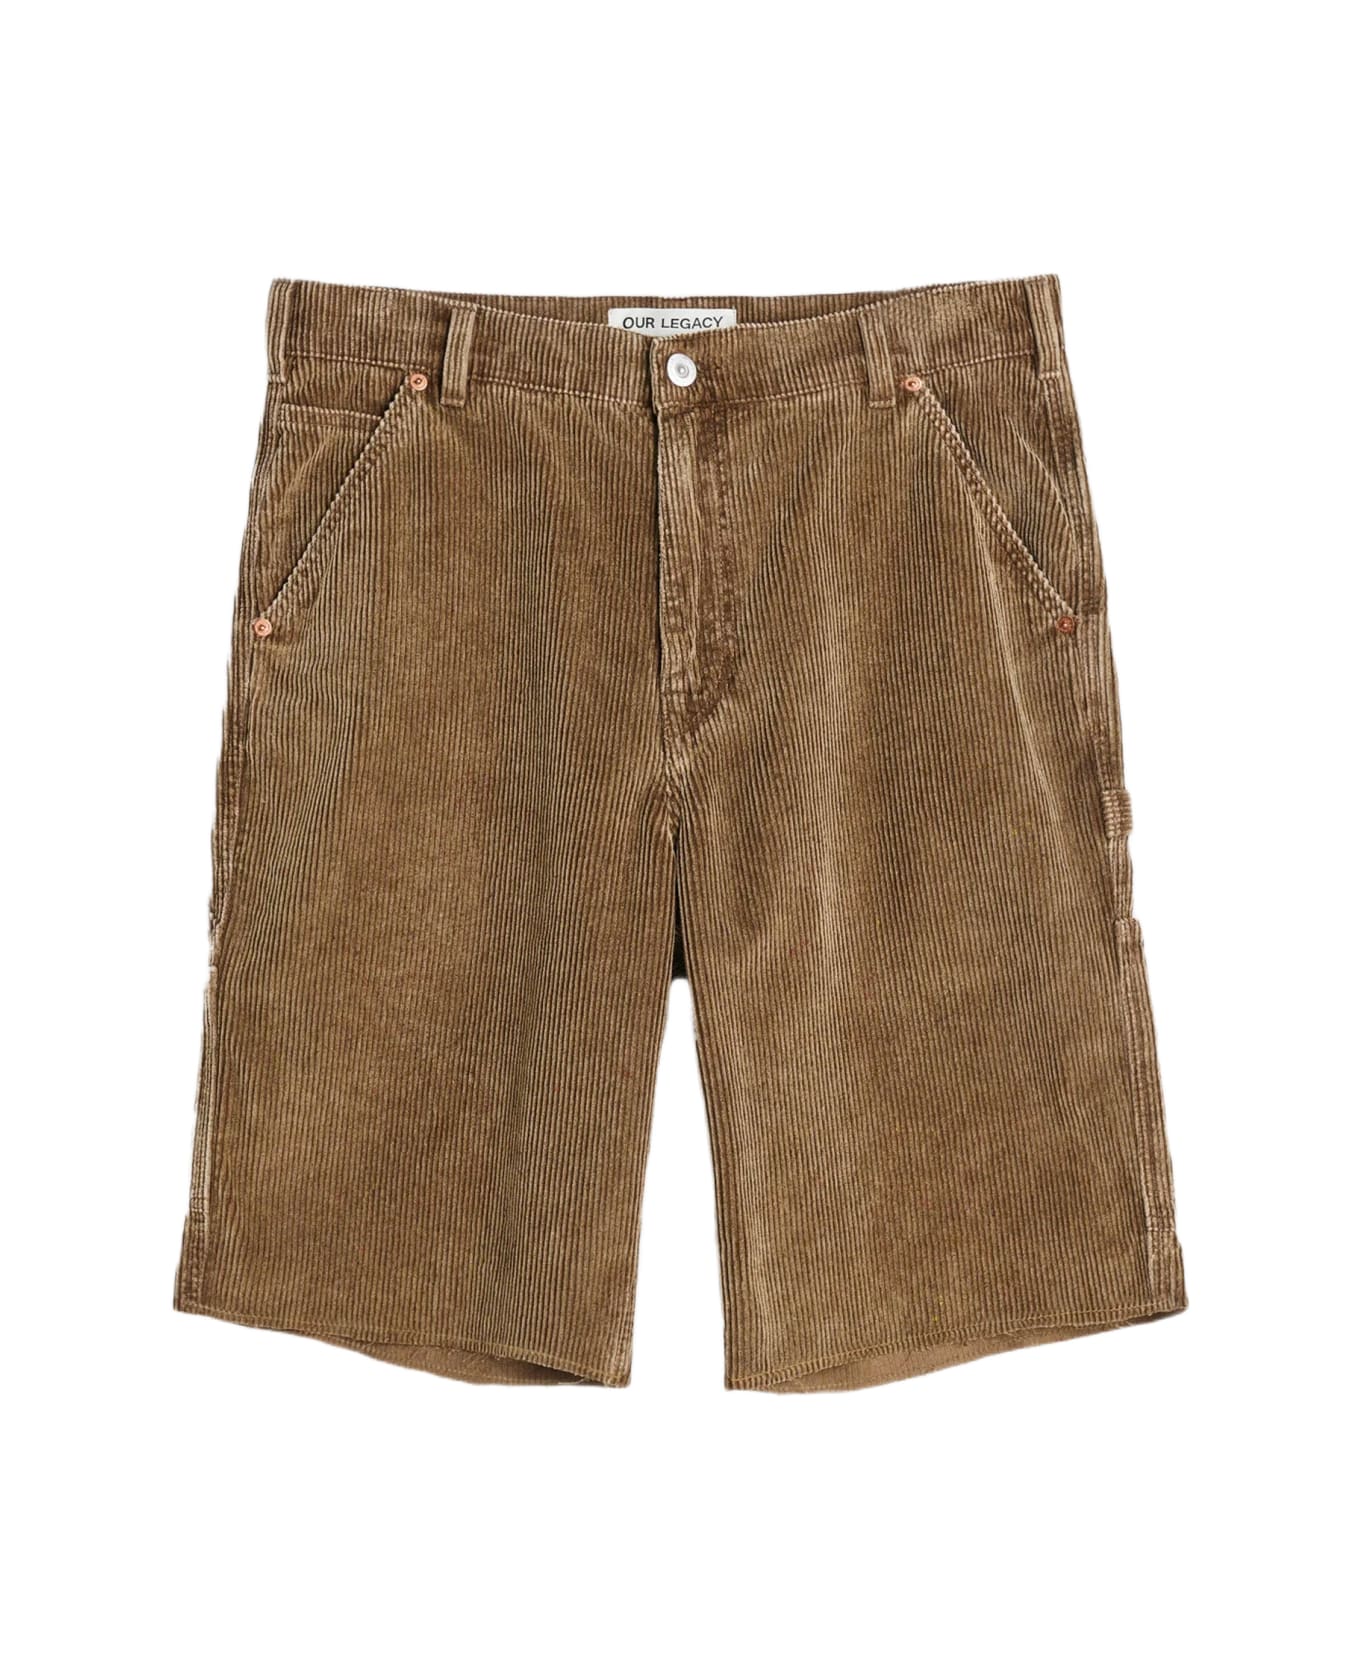 Our Legacy Joiner Short Light brown corduroy work shorts with spray paint - Joiner Short - Tortora ショートパンツ